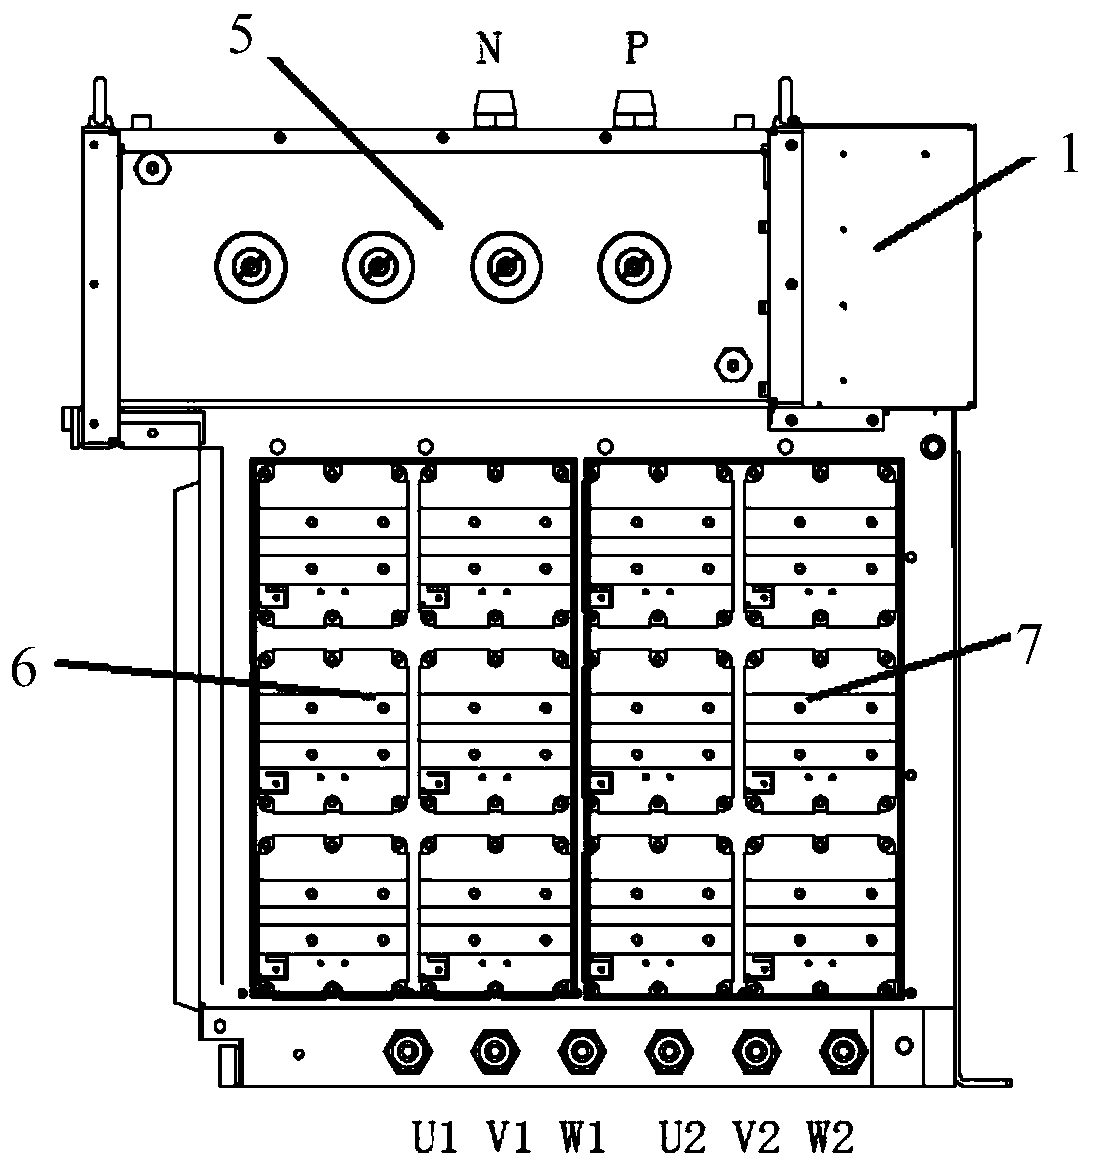 Air-cooled axle-controlled traction inversion power unit with double-sided heat dissipation